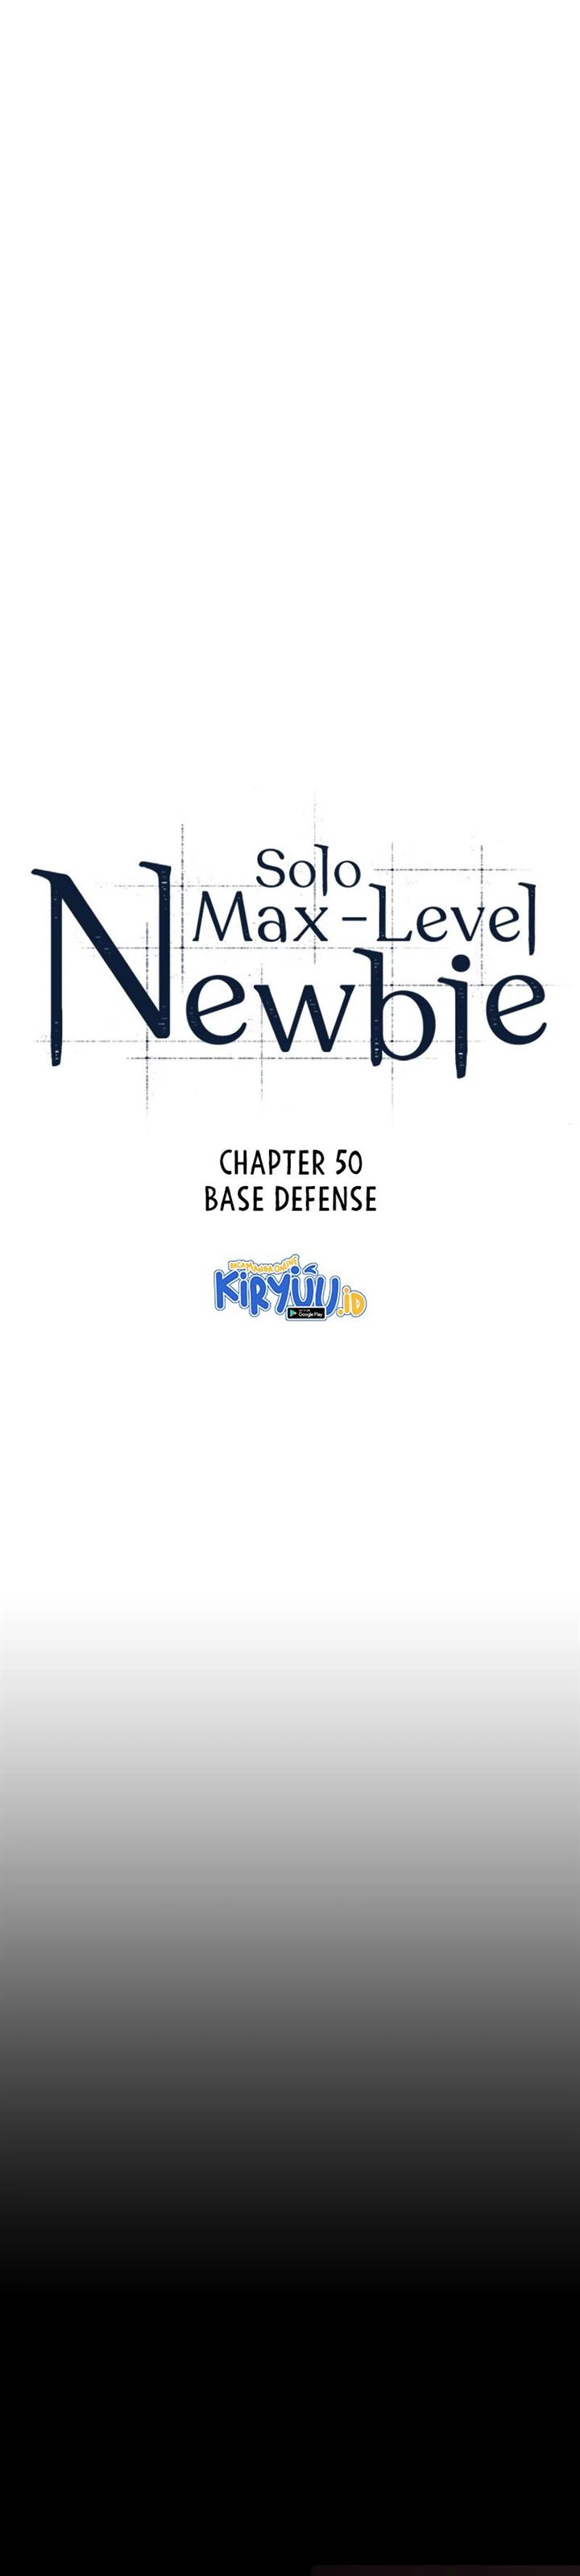 Solo Max-Level Newbie Chapter 50